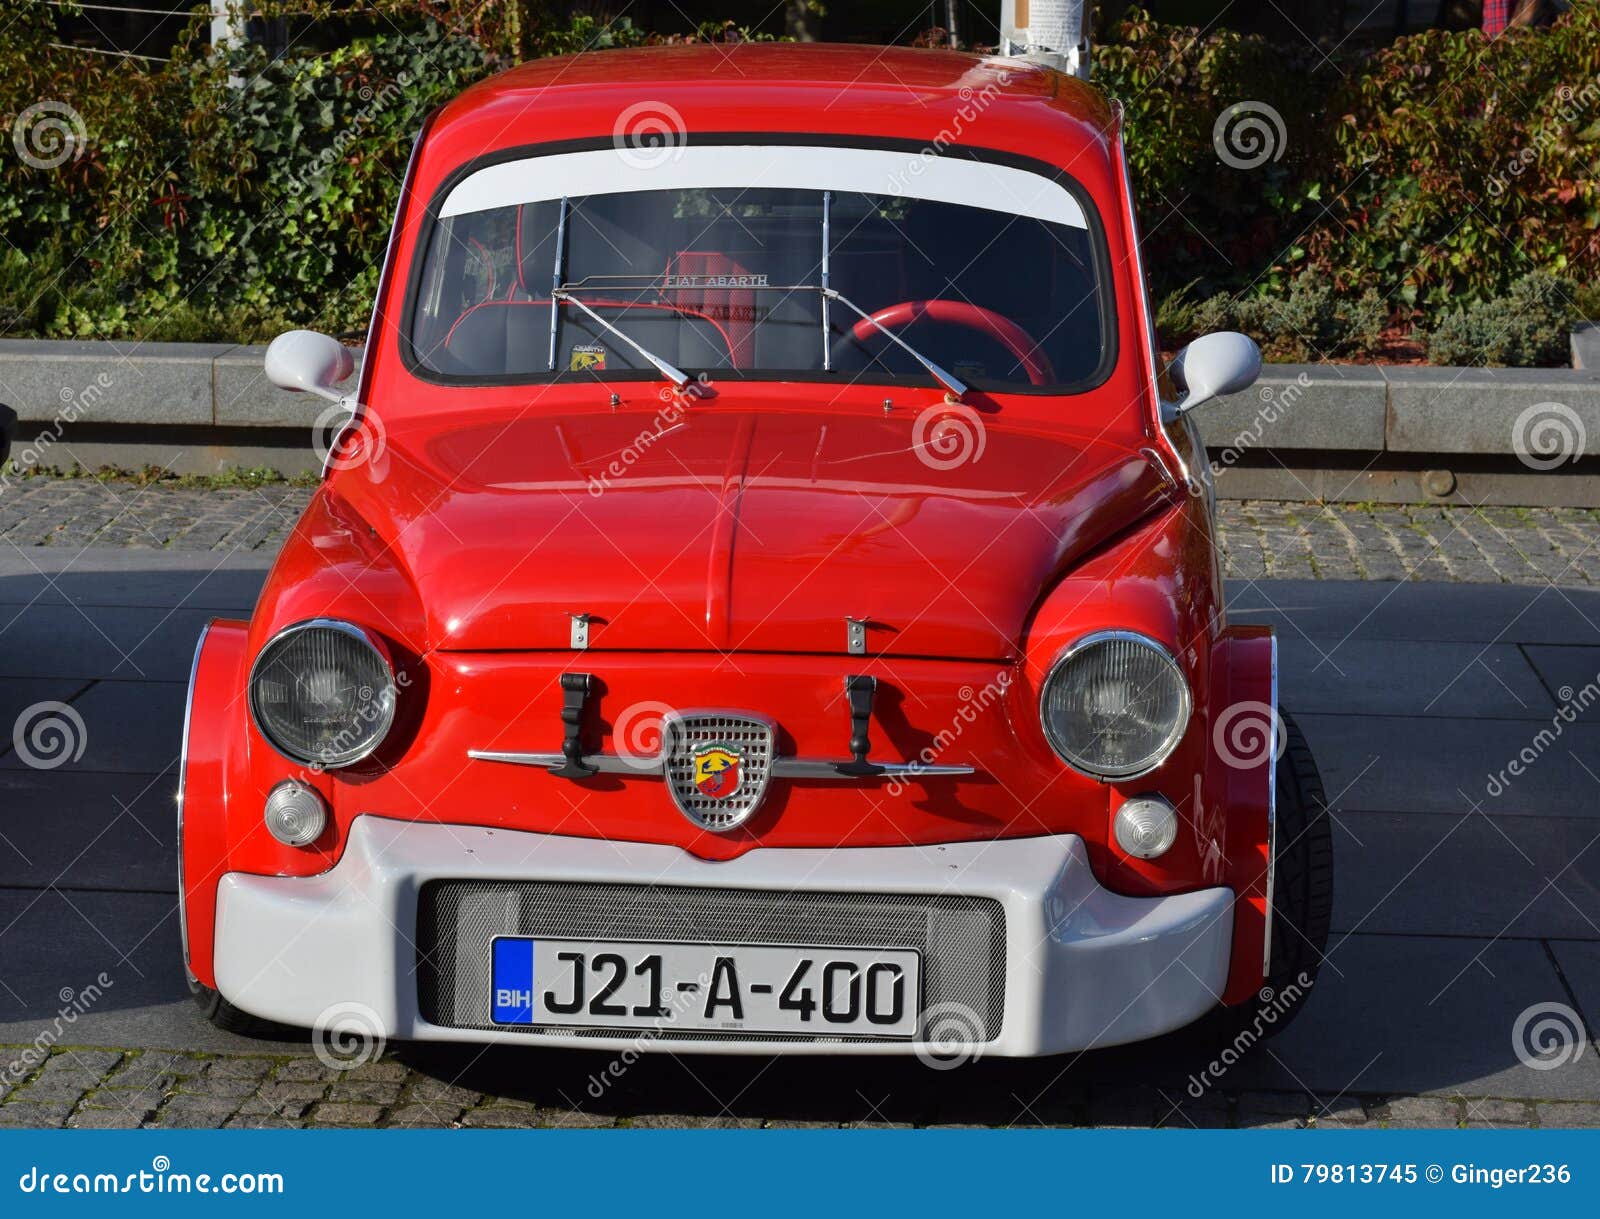 Fiat 500 Abarth Oldtimer Model Beautifull Red And White Trim Editorial Image Image Of Abarth Trim